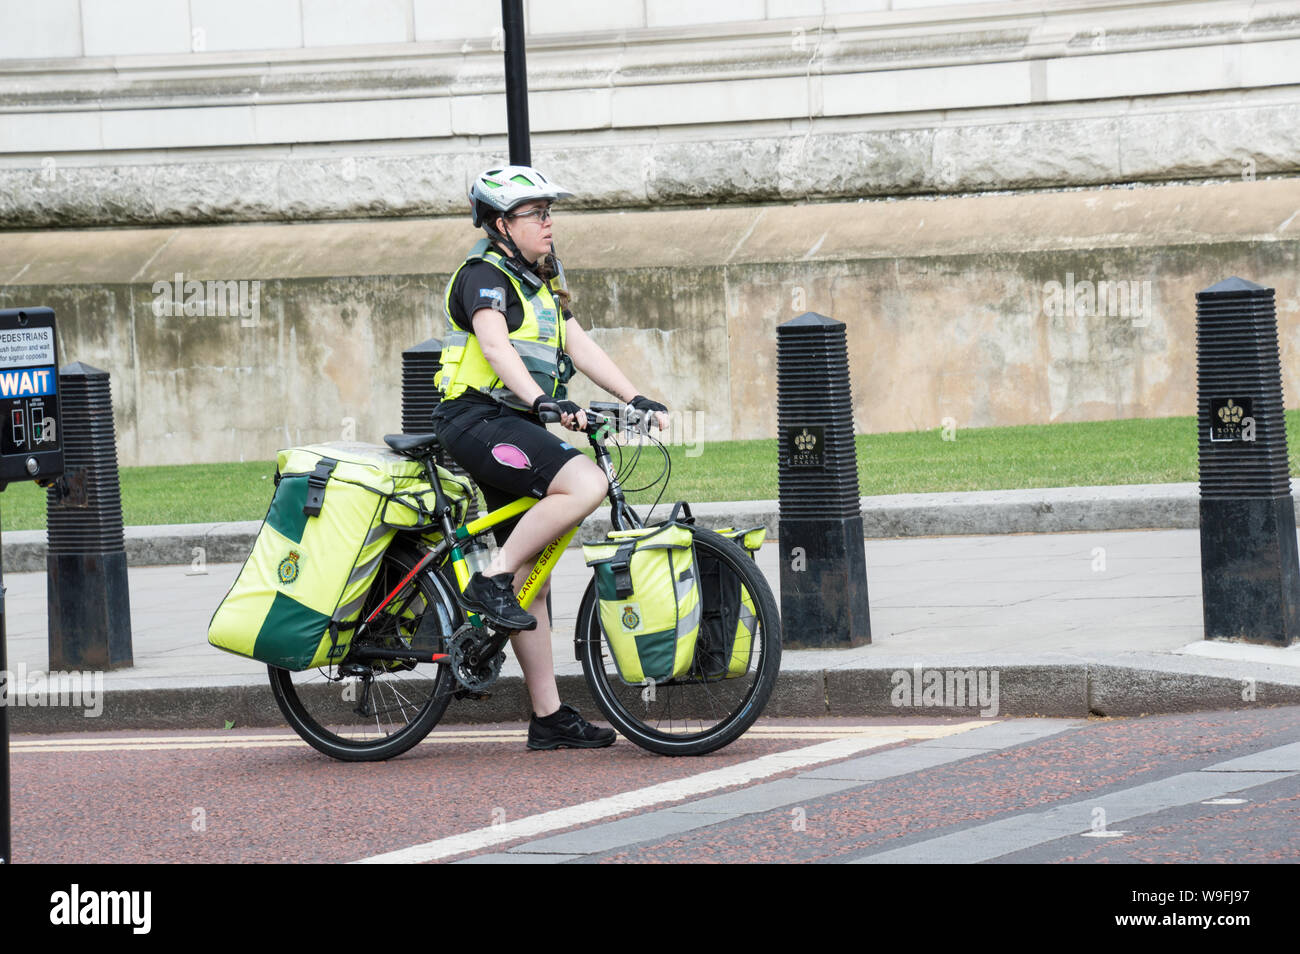 Paramedic in bicycle / bike at London signal waiting for signal to turn green Stock Photo